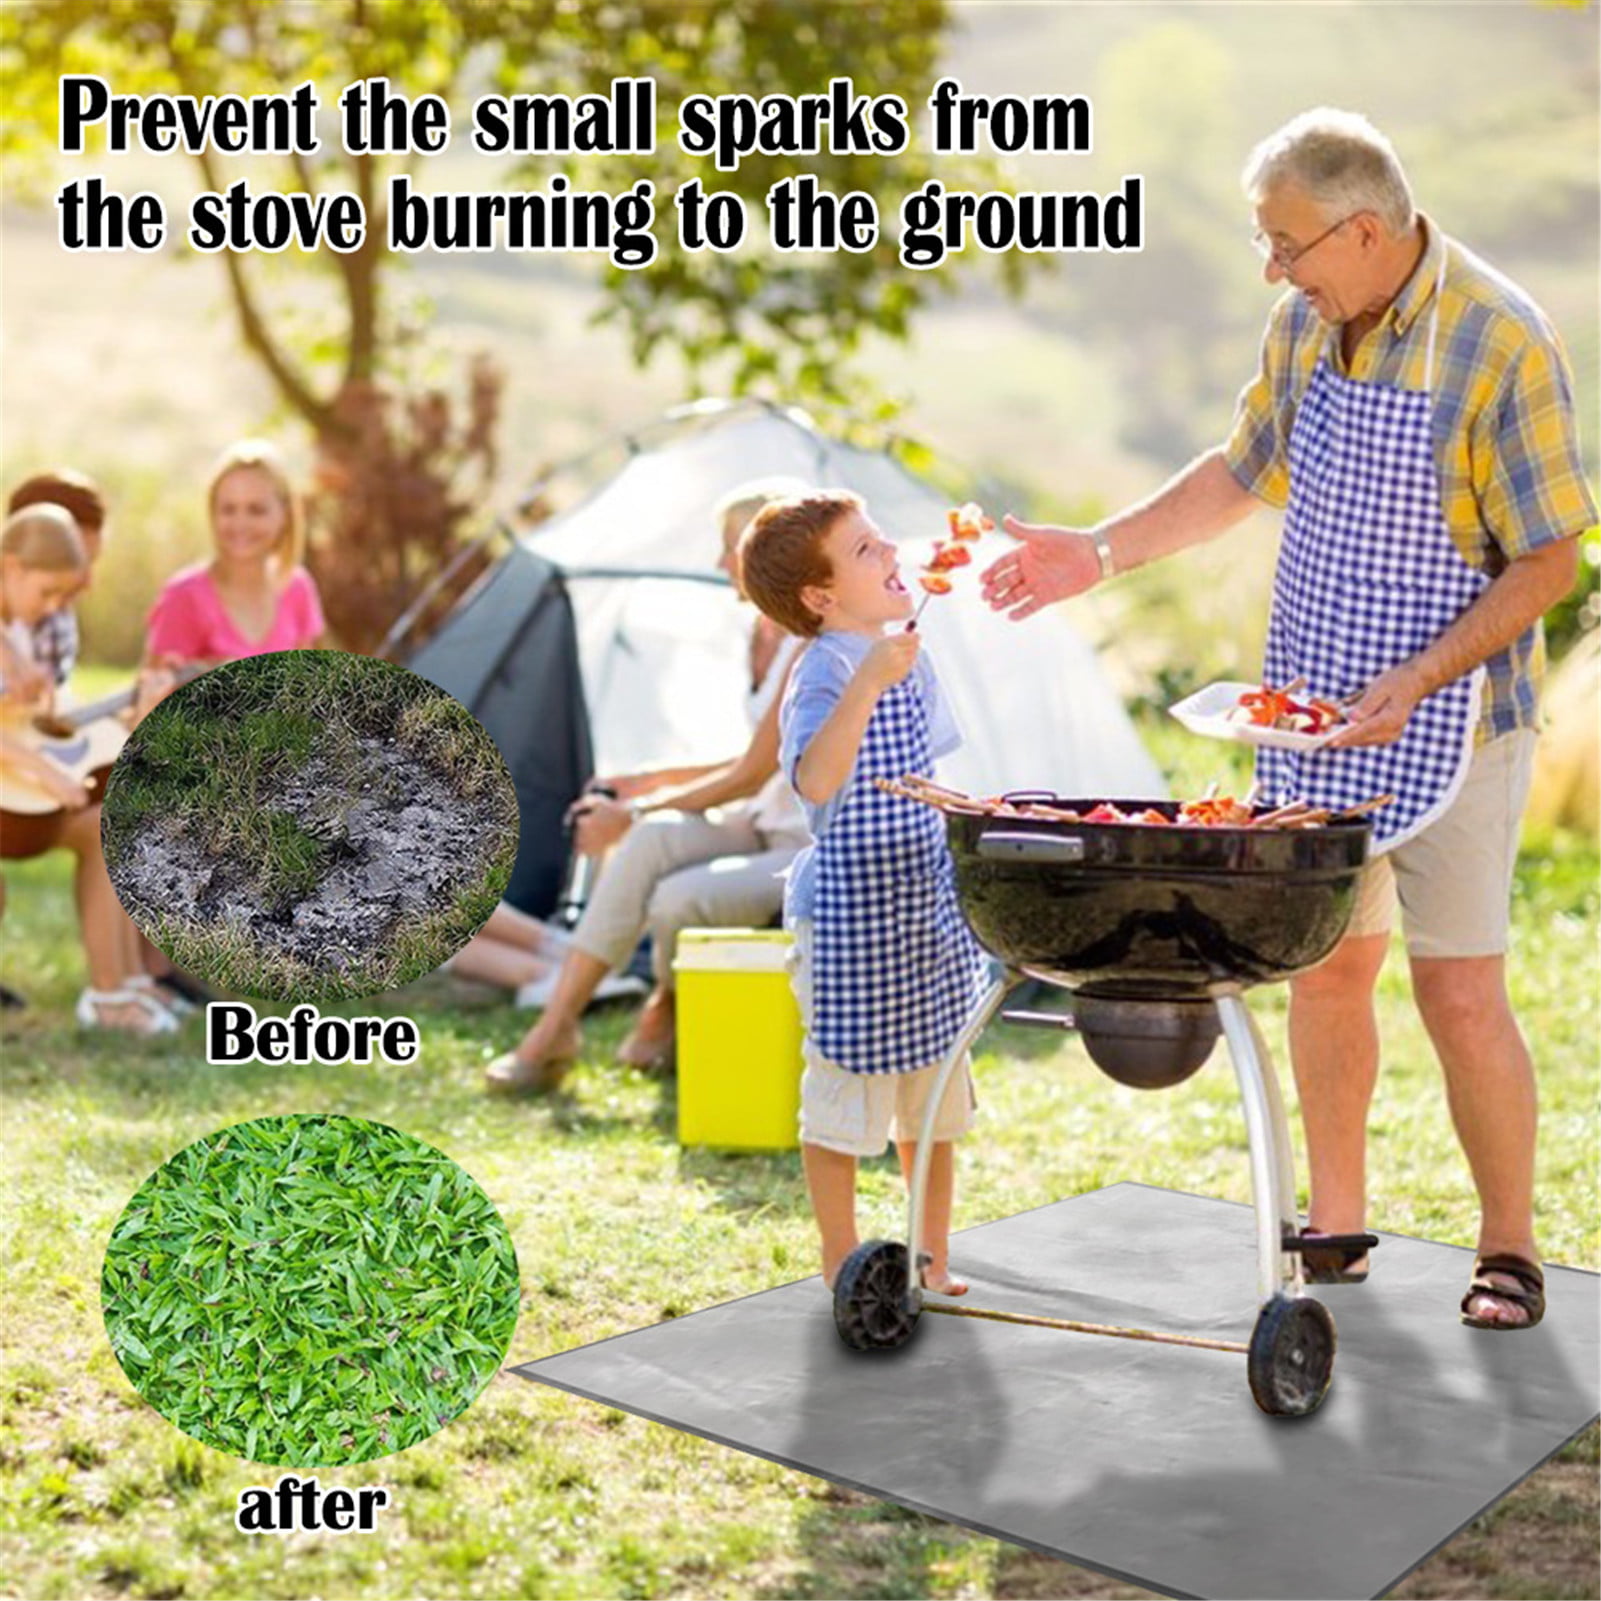 Outdoor Camping Picnic Fireplace Fireproof Mat Pad Cushion Lawn Barbecue Healthy 